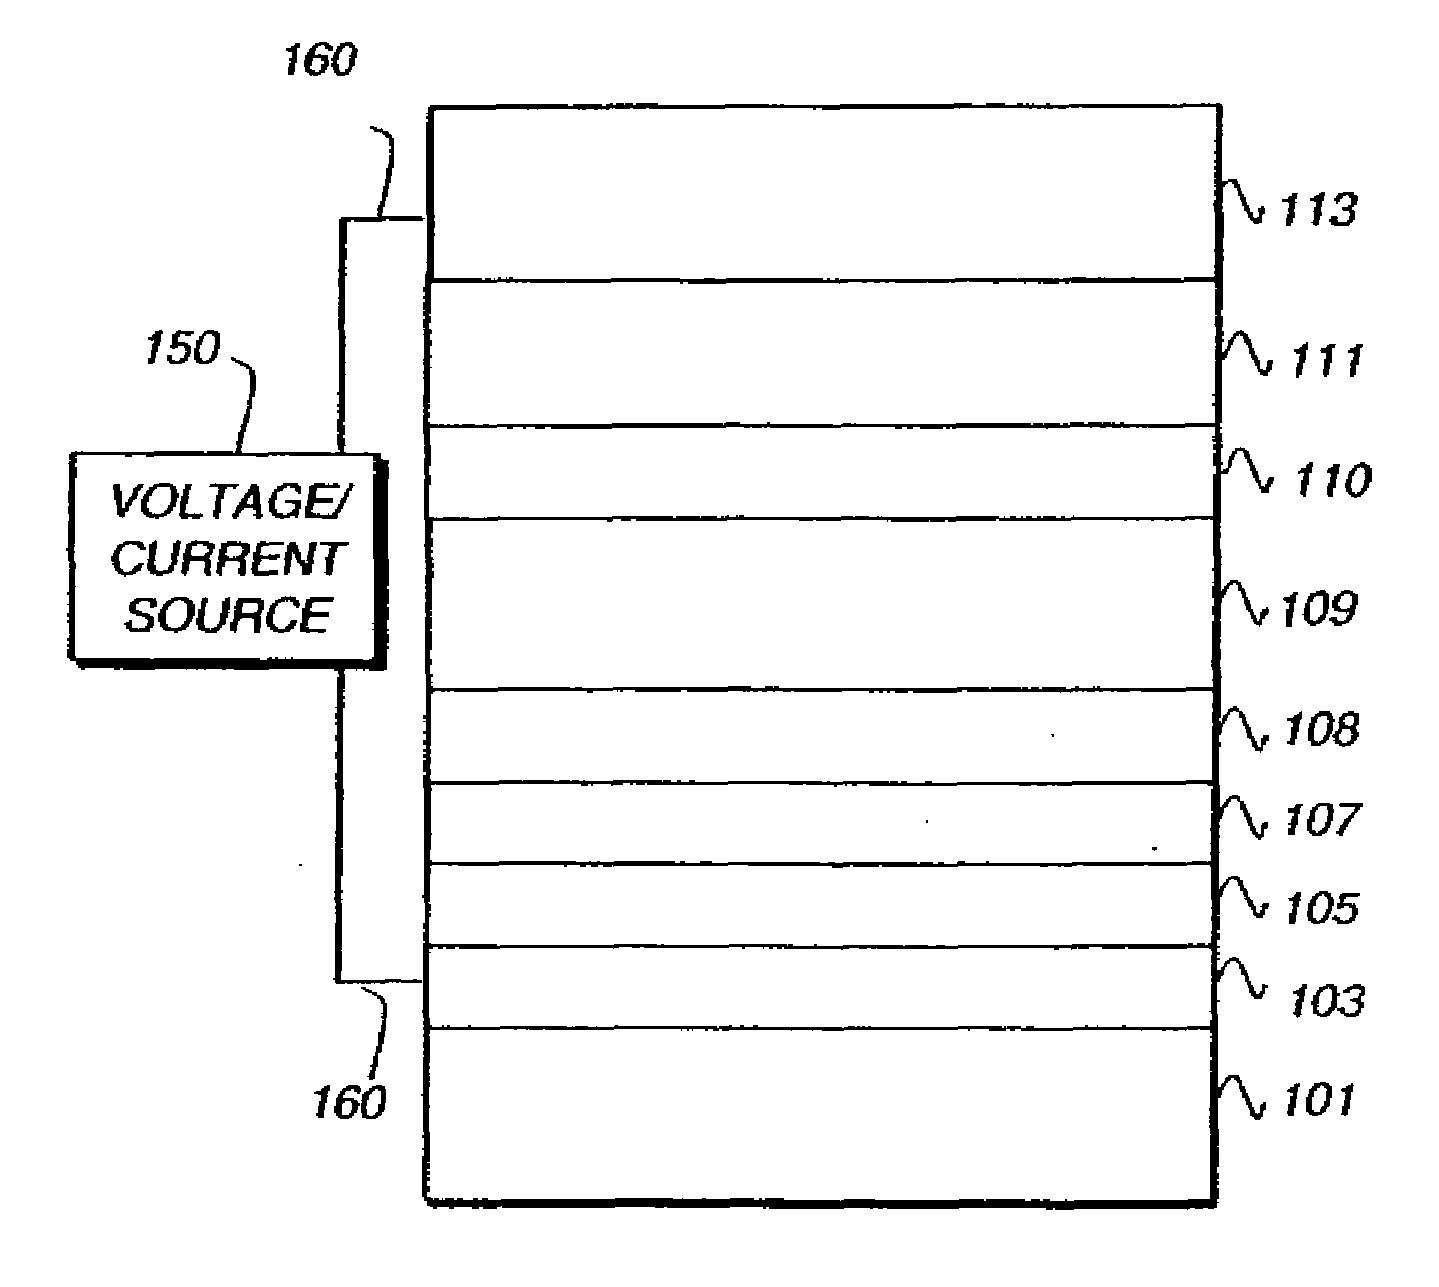 Phosphorescent OLED device with mixed hosts